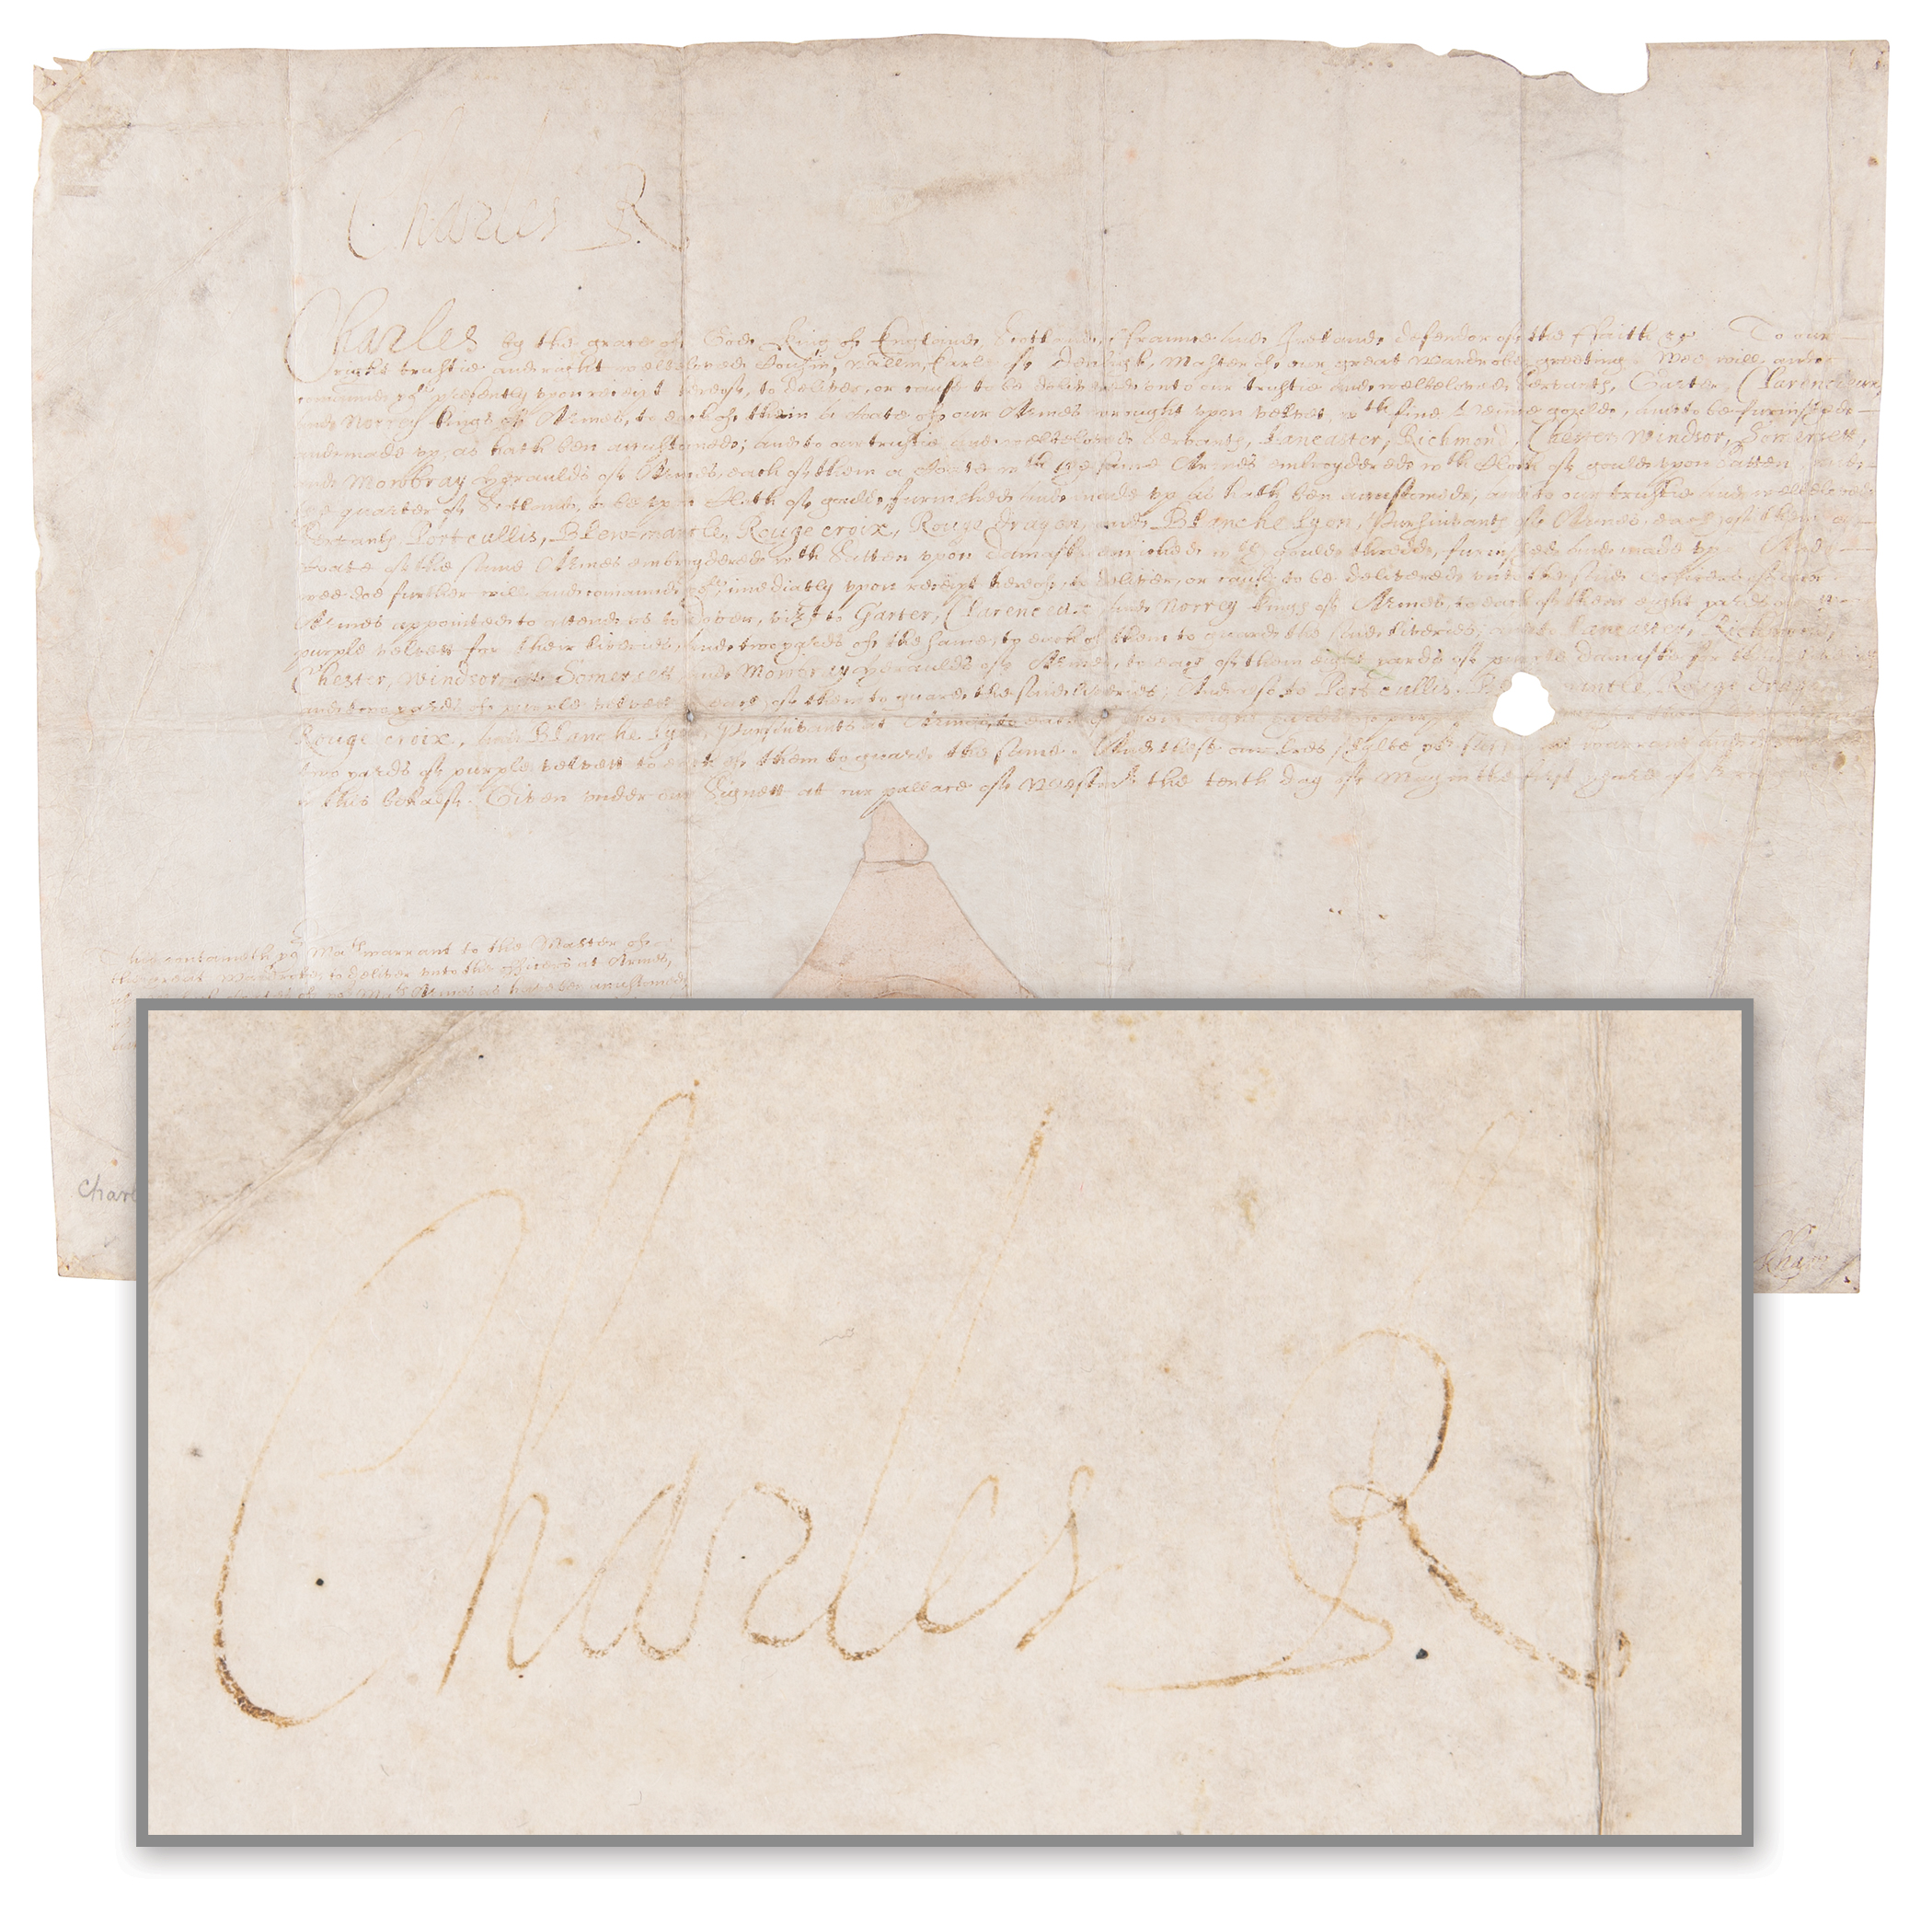 Lot #67 King Charles I Signed 1625 Document - approving officer livery for the arrival of the future queen